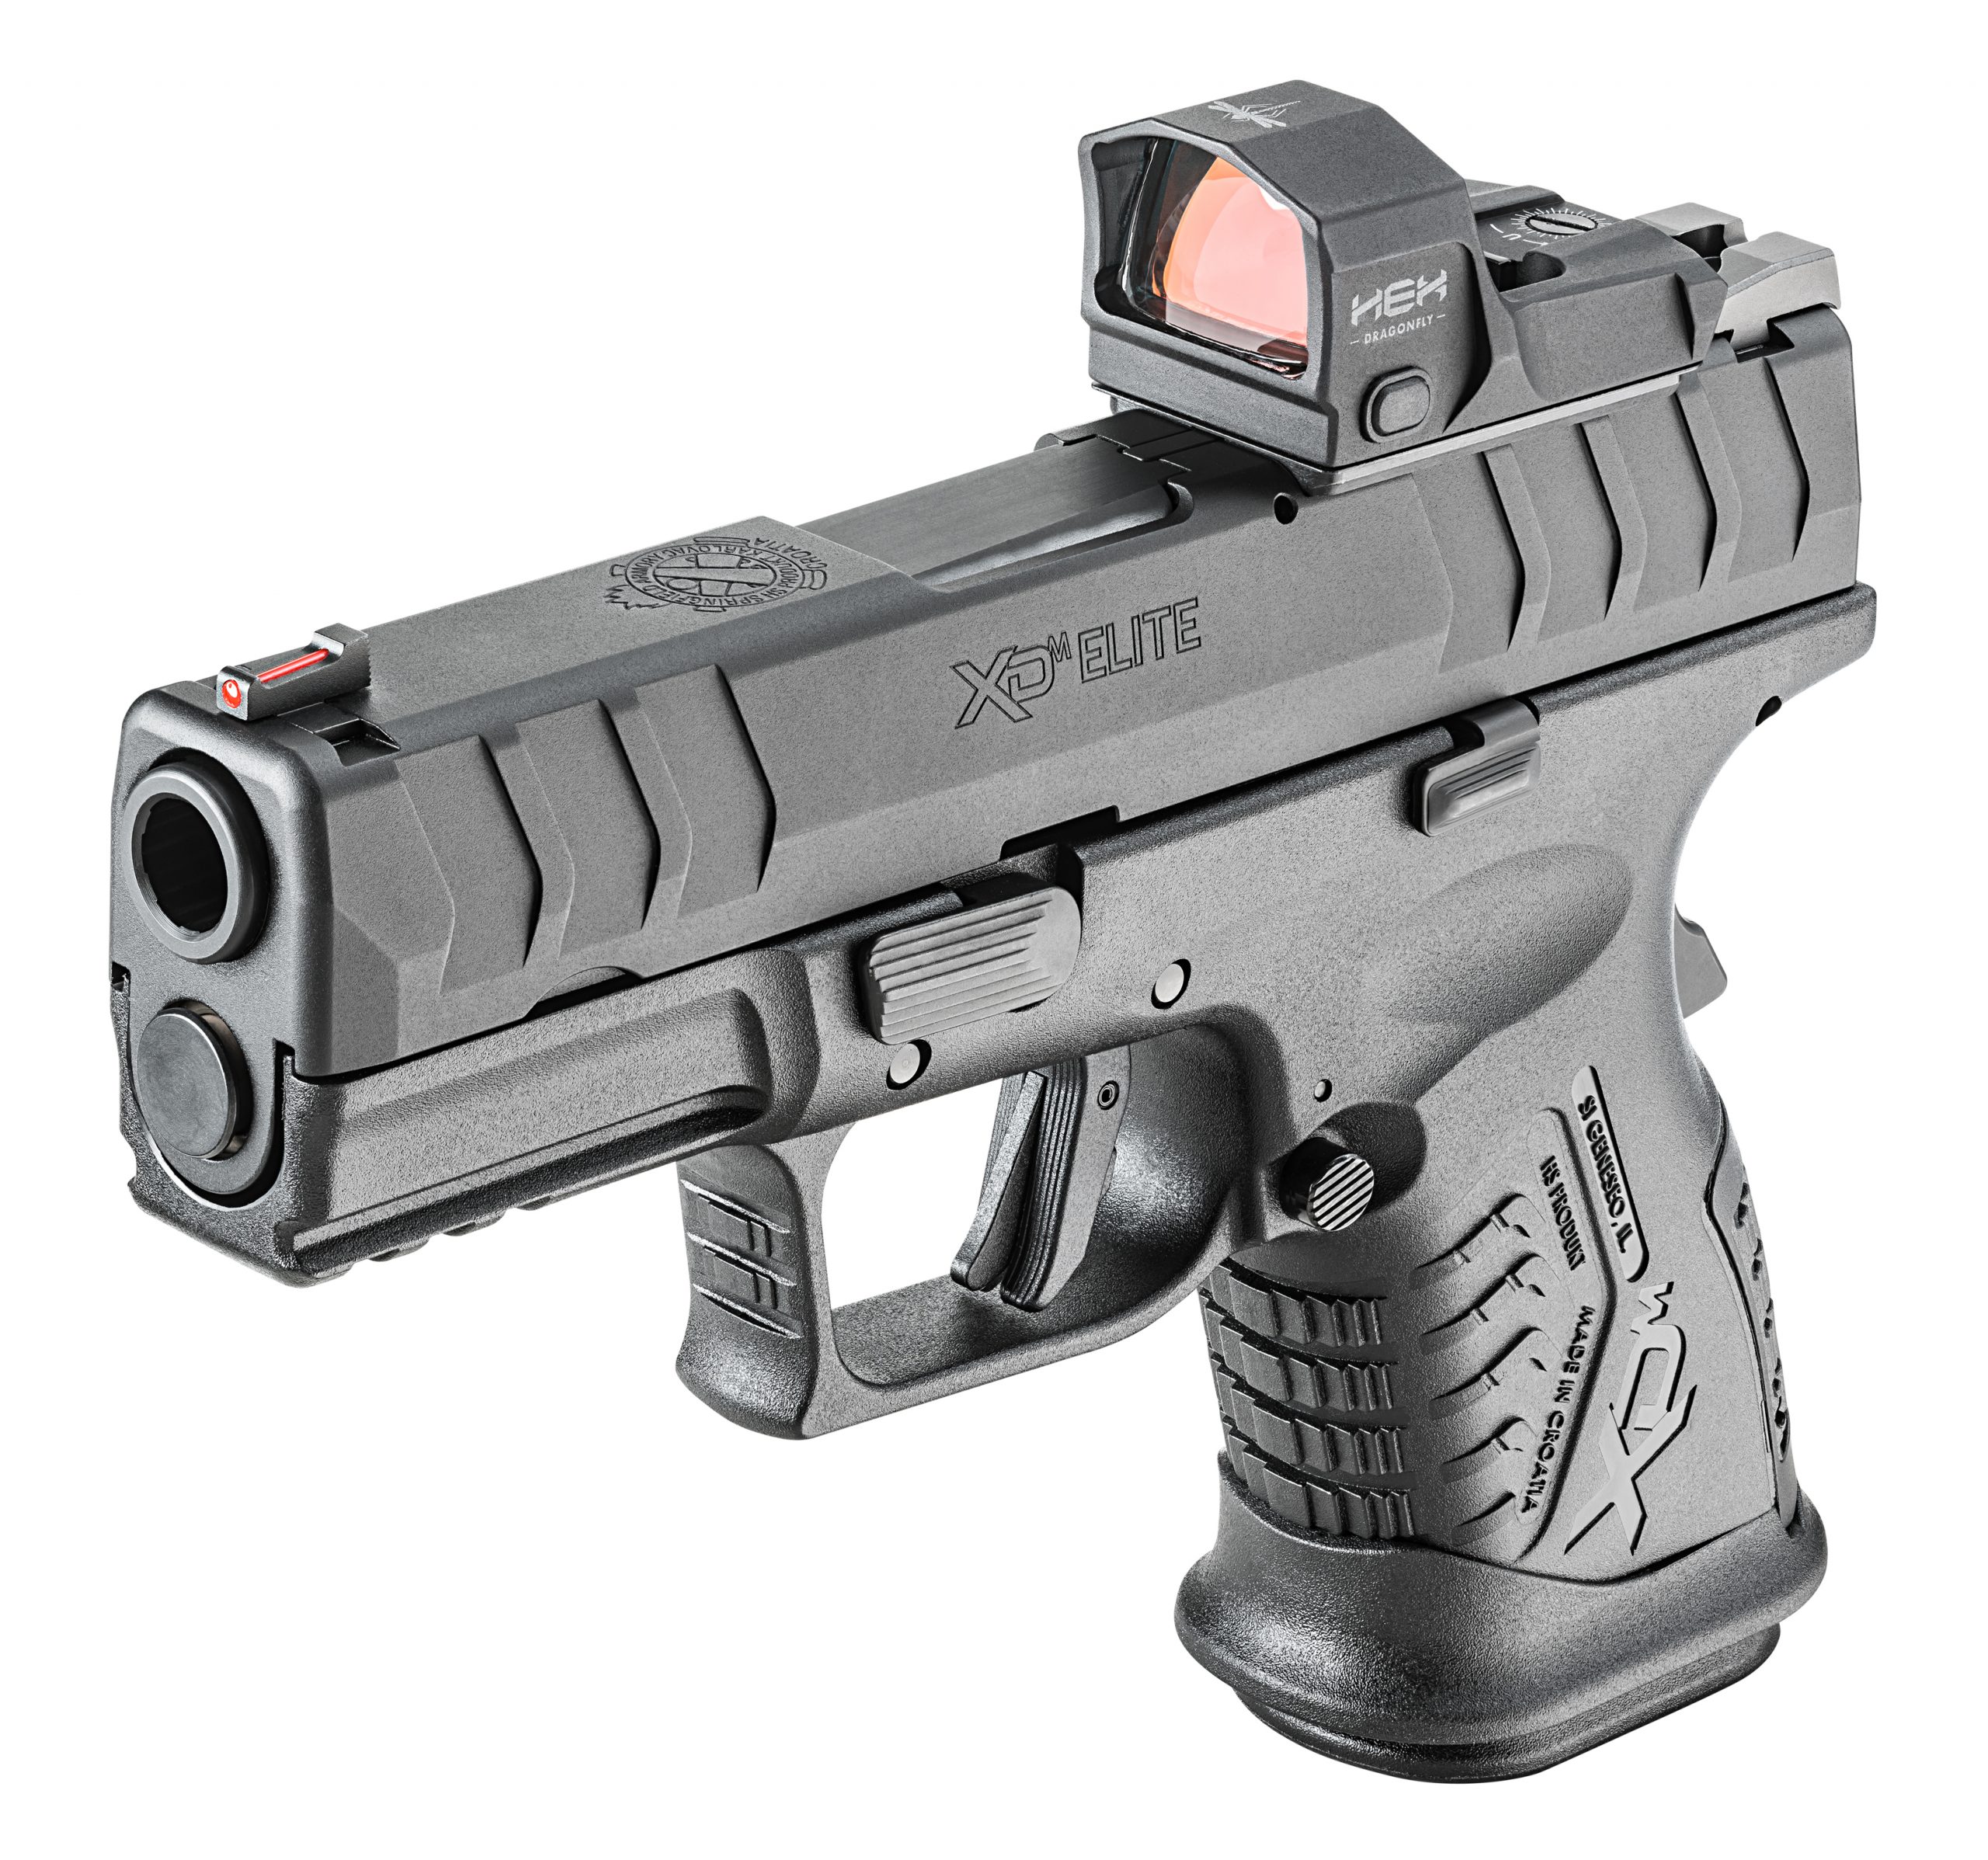 The New 10mm XD-M Elite OSP Compact Pistol from Springfield